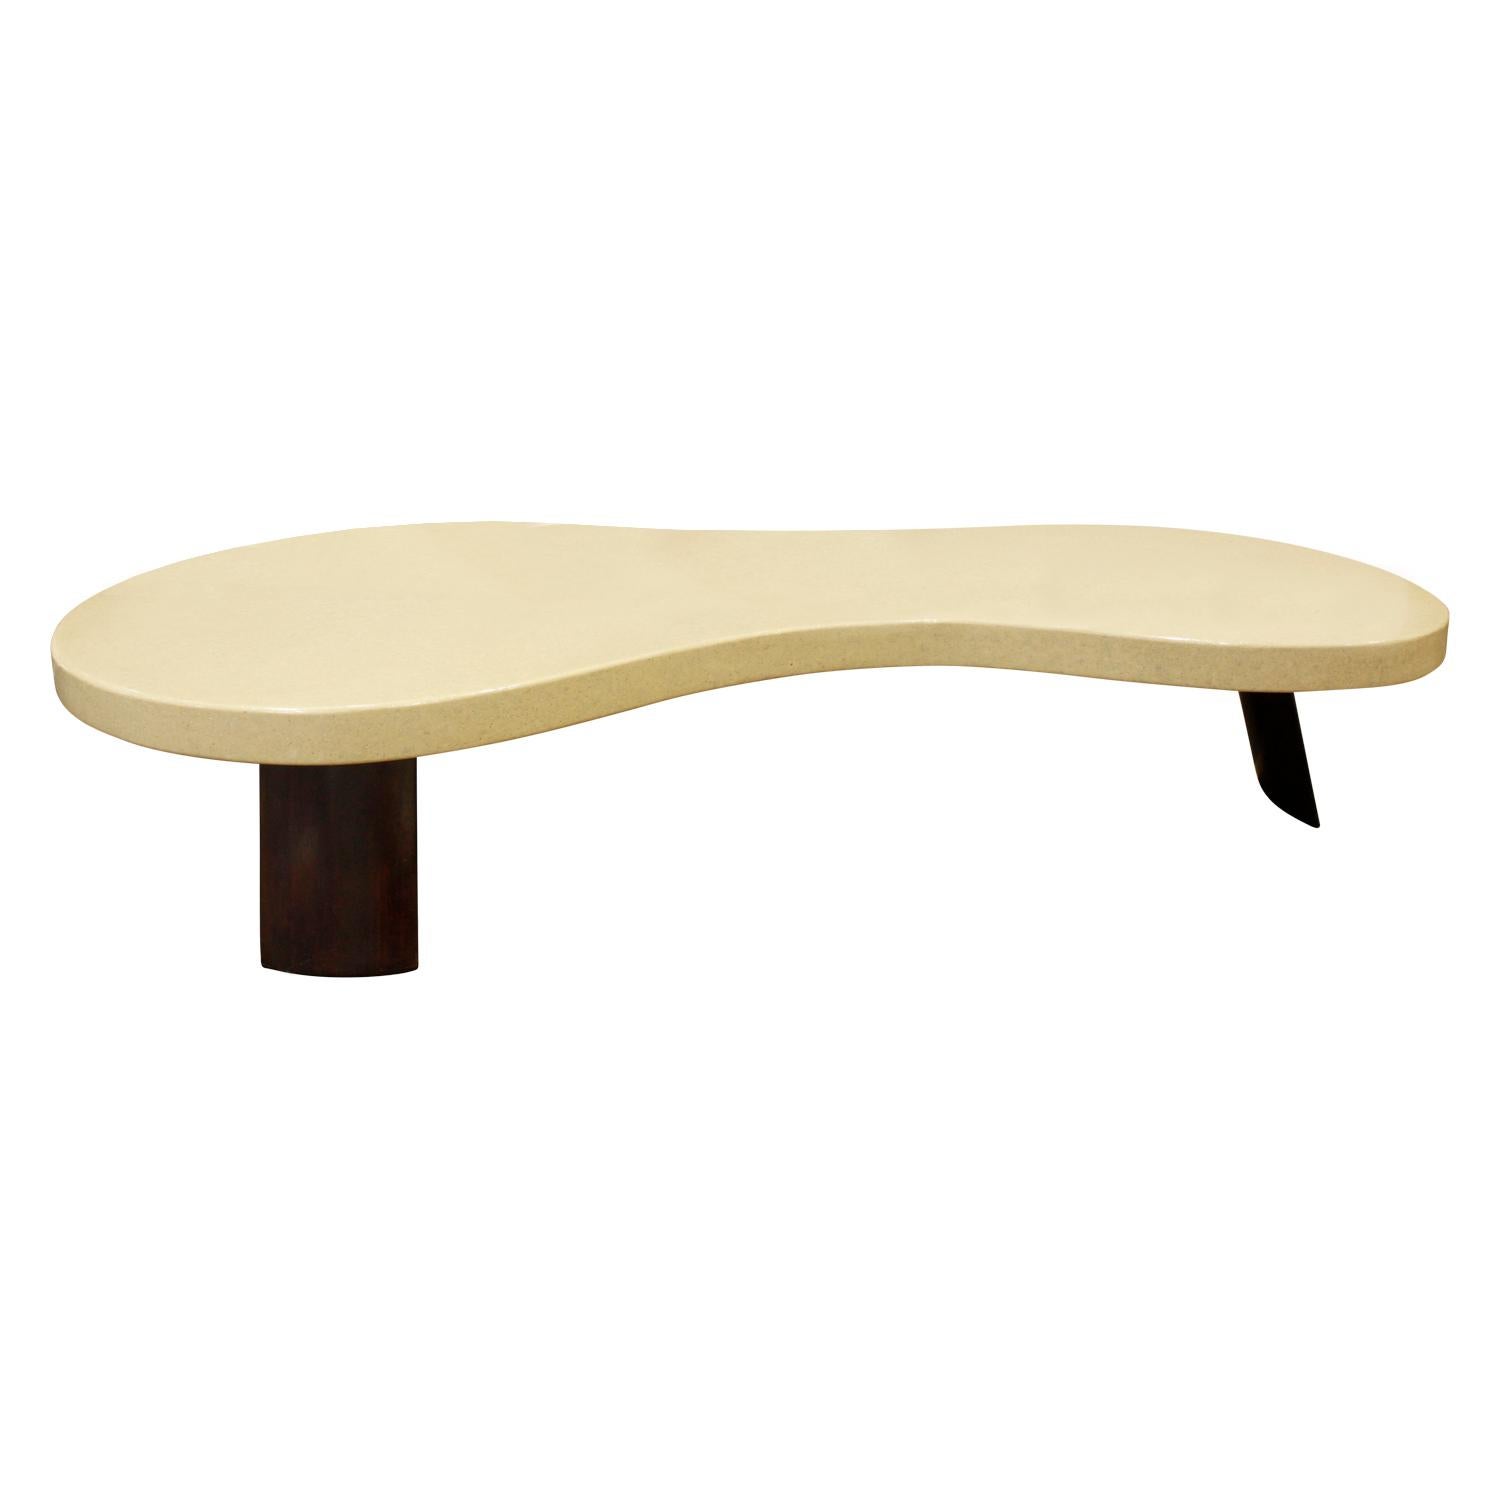 Kidney shaped coffee table with lacquered cork top and canted mahogany slab legs by Paul Frankl for Johnson Furniture, American, 1950s (John Stuart metal label on bottom). This is an iconic Paul Frankl table.